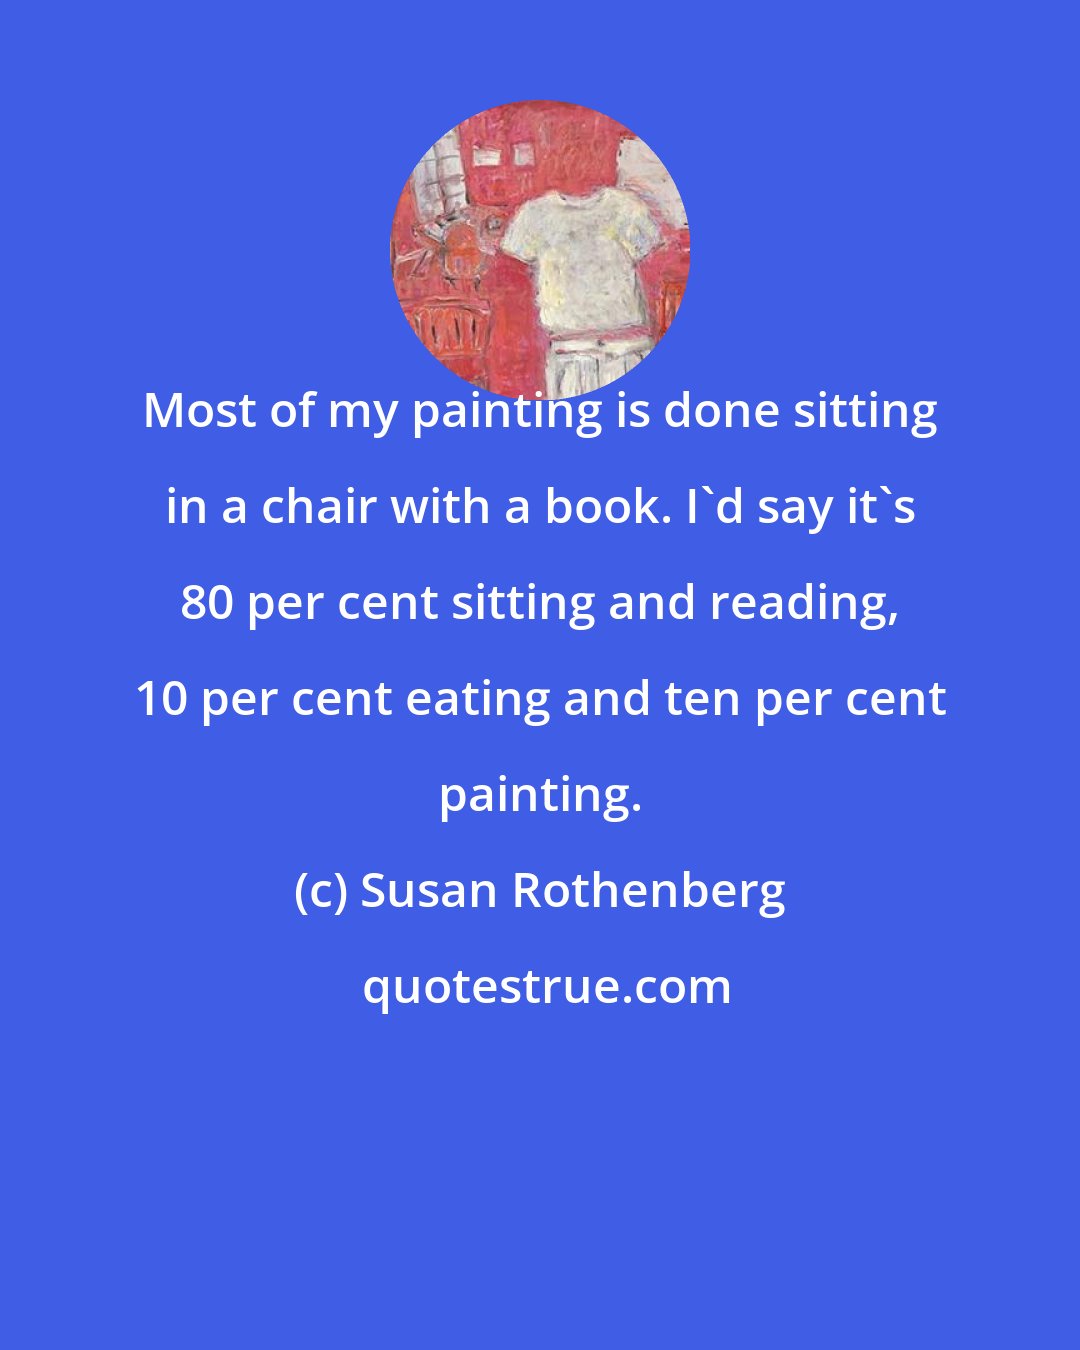 Susan Rothenberg: Most of my painting is done sitting in a chair with a book. I'd say it's 80 per cent sitting and reading, 10 per cent eating and ten per cent painting.